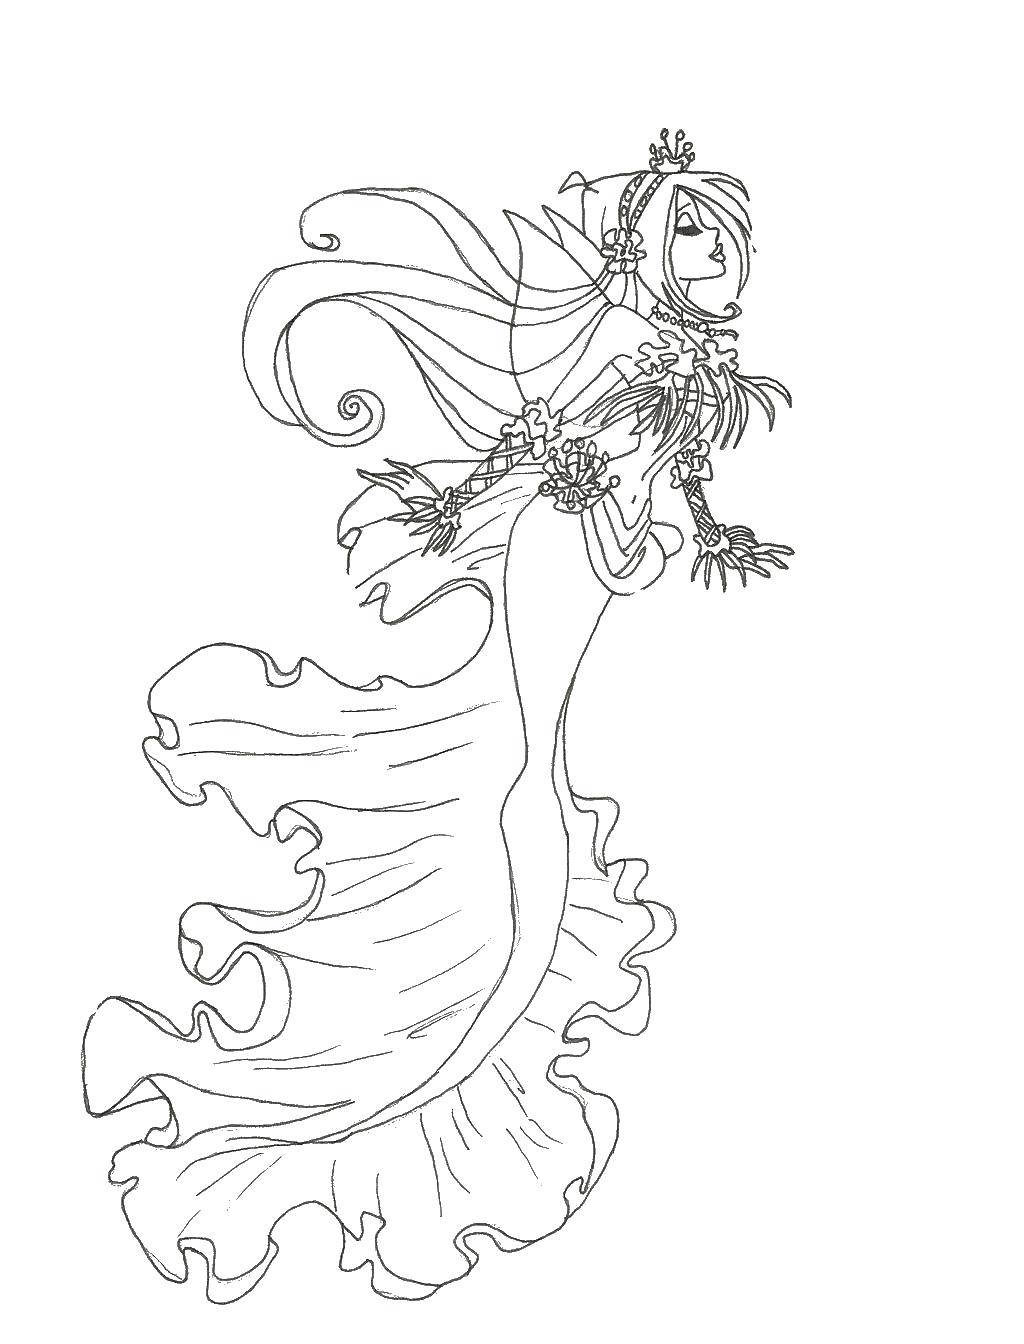 Coloring Fairy. Category fairies. Tags:  fairies , wings, girl.